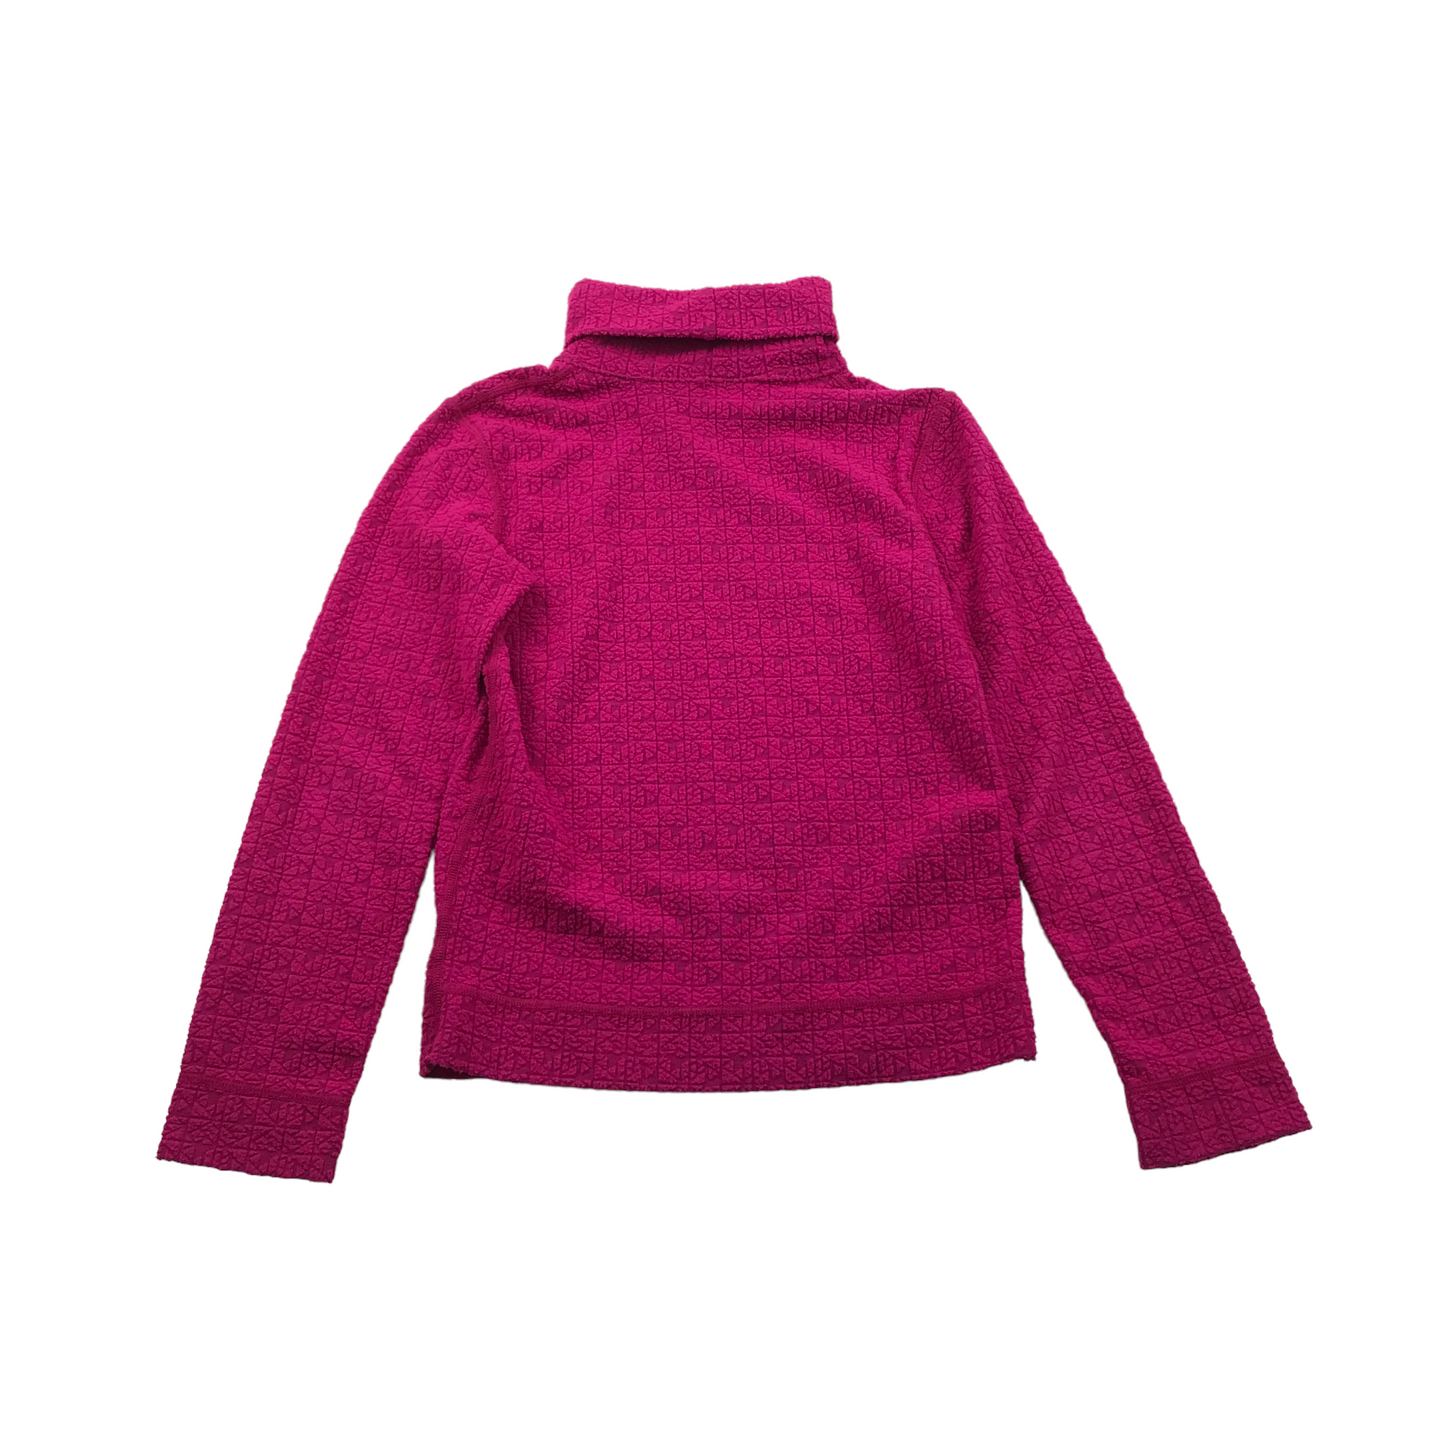 Decathlon Pink Thermal Top with Turtle Neck Age 10